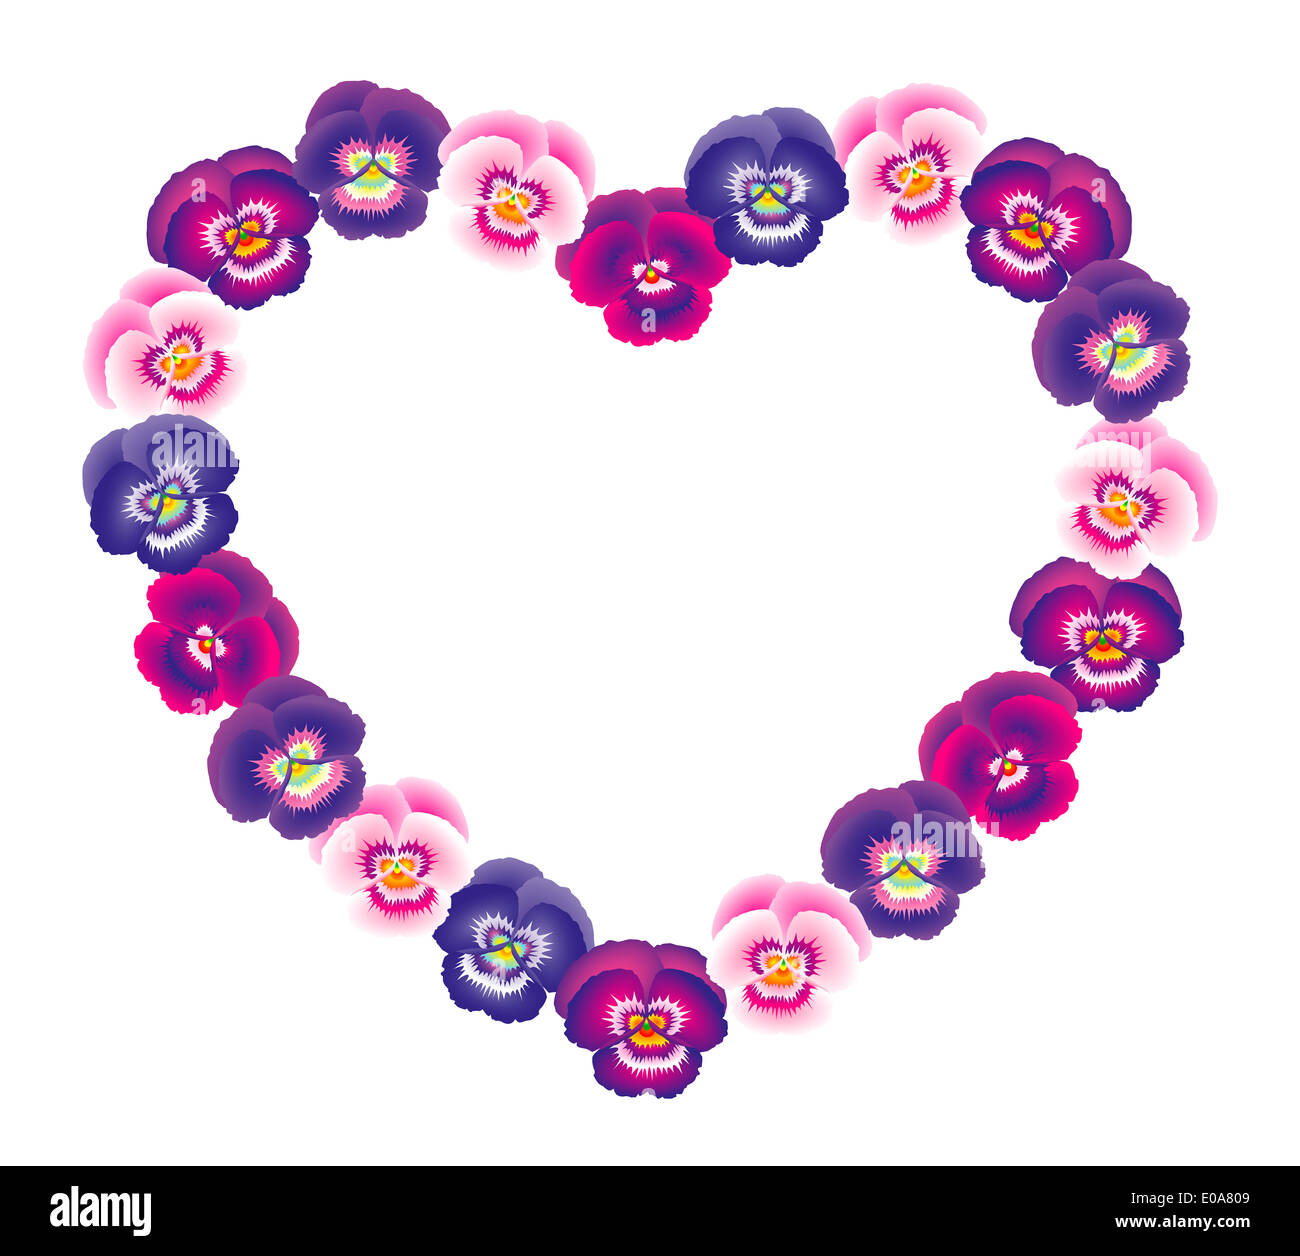 Illustration of a pink, purple and violet pansy heart bouquet. Stock Photo